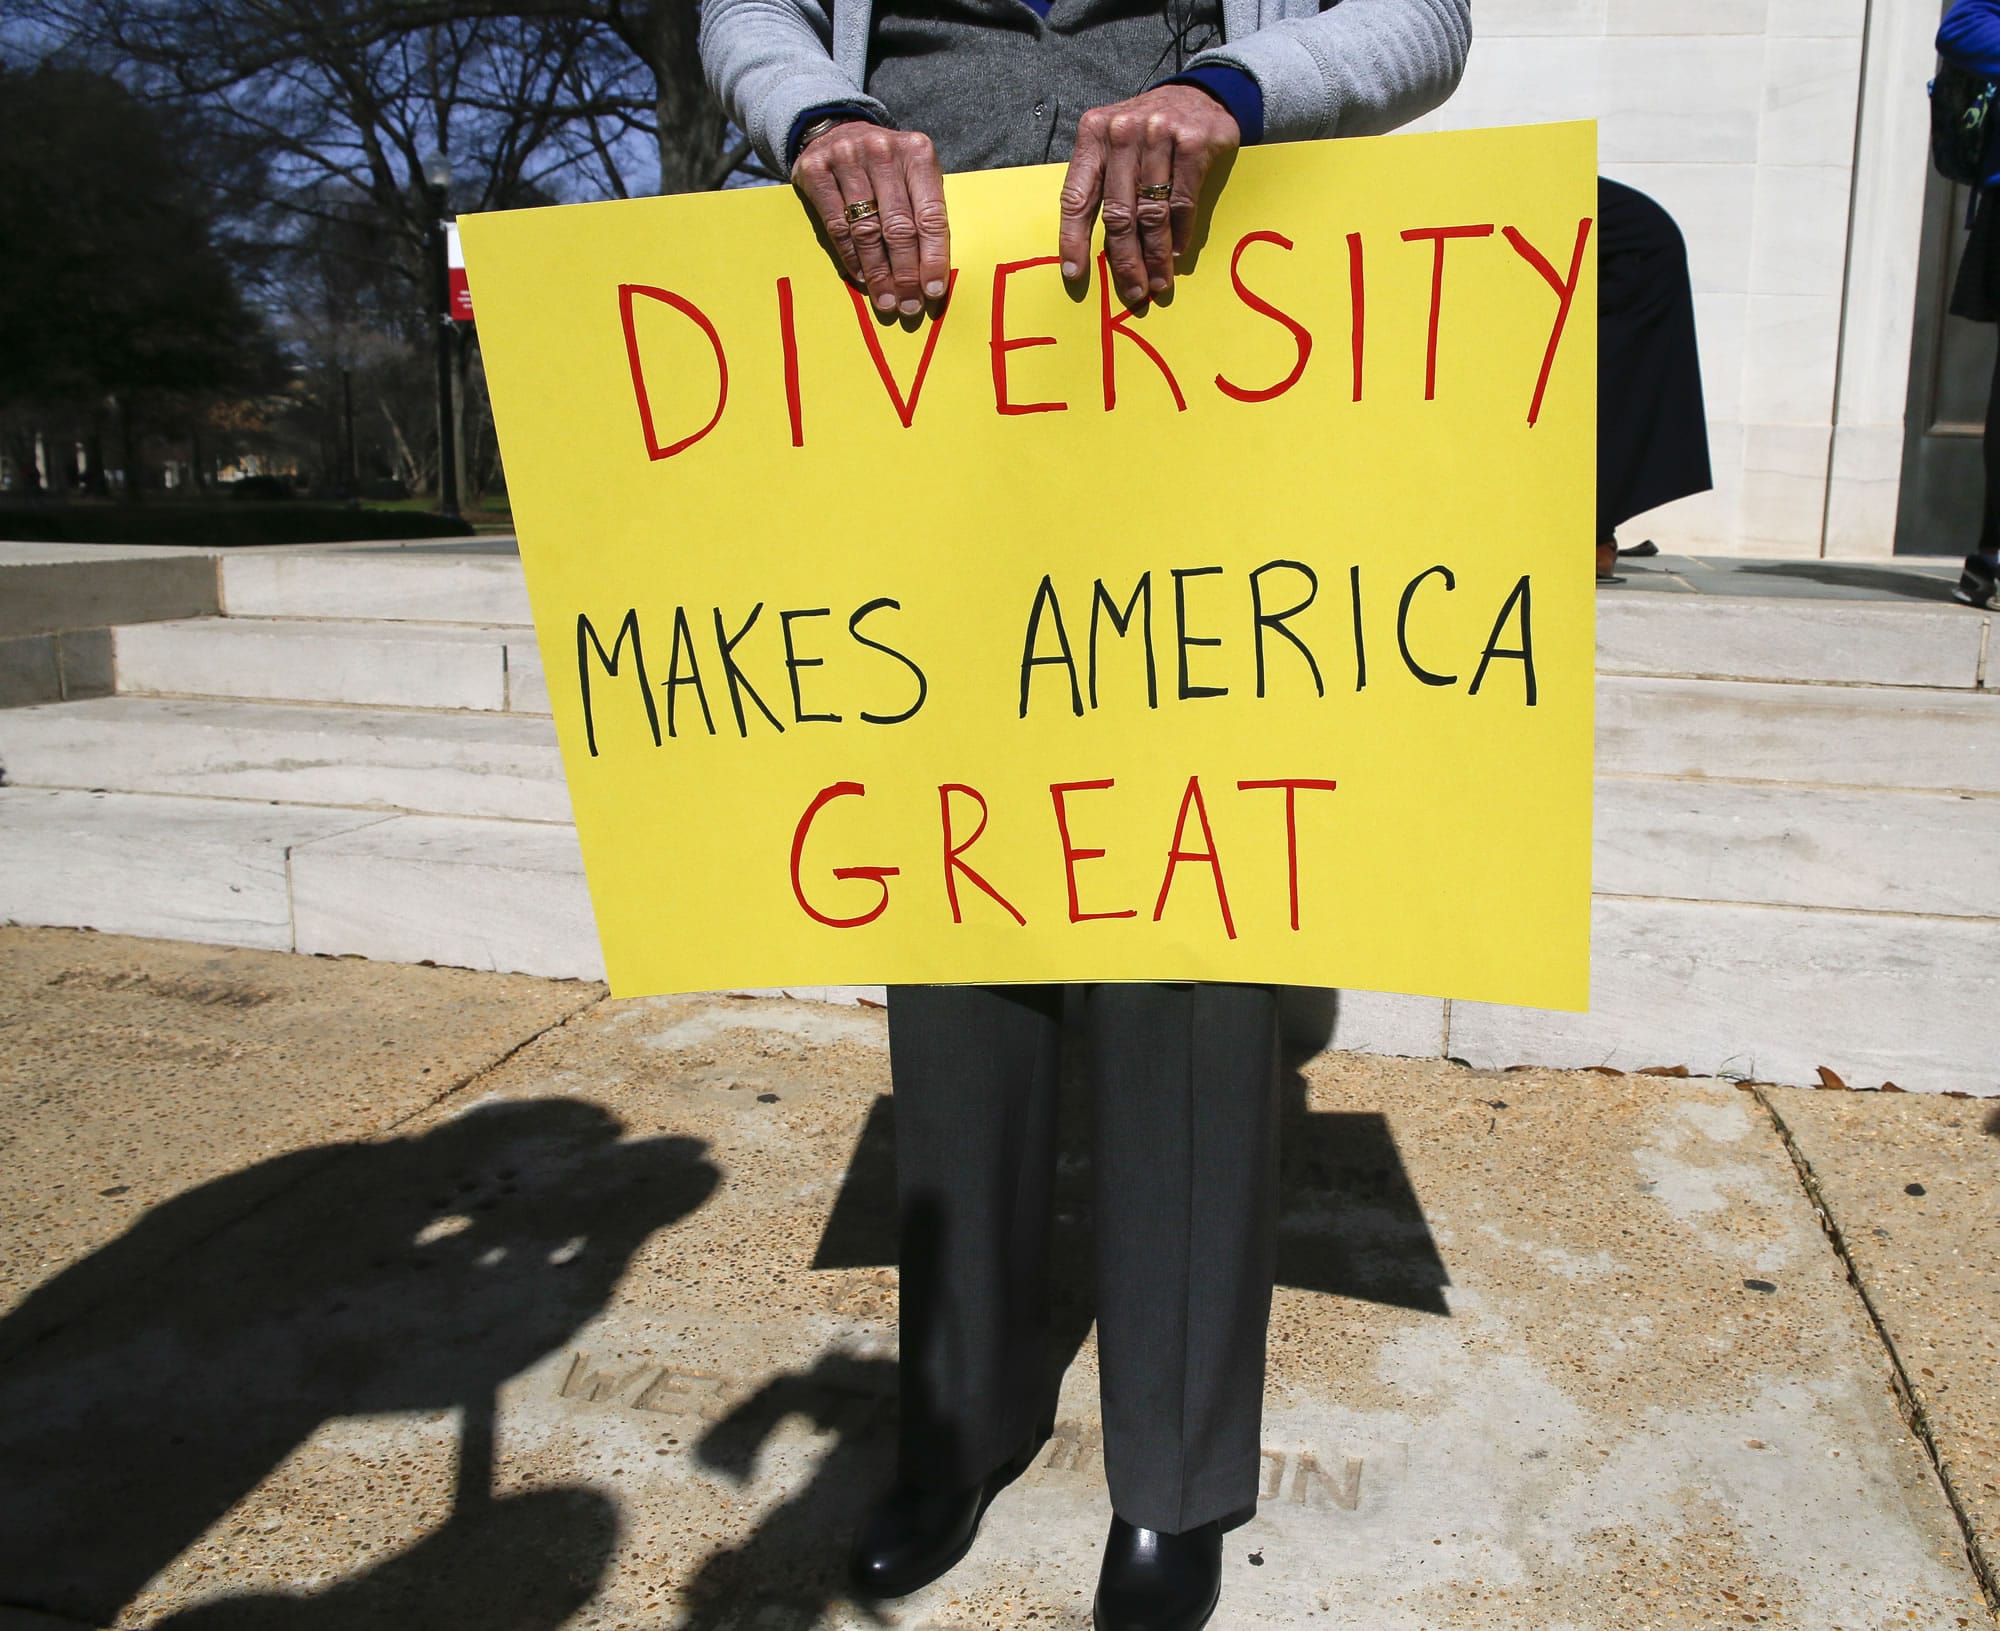 Professor Fran O'Neal holds a sign during a gathering at the University of Alabama in Tuscaloosa, Ala., to support an open campus and oppose the travel ban imposed by President Donald Trump Thursday, Feb.9, 2017.